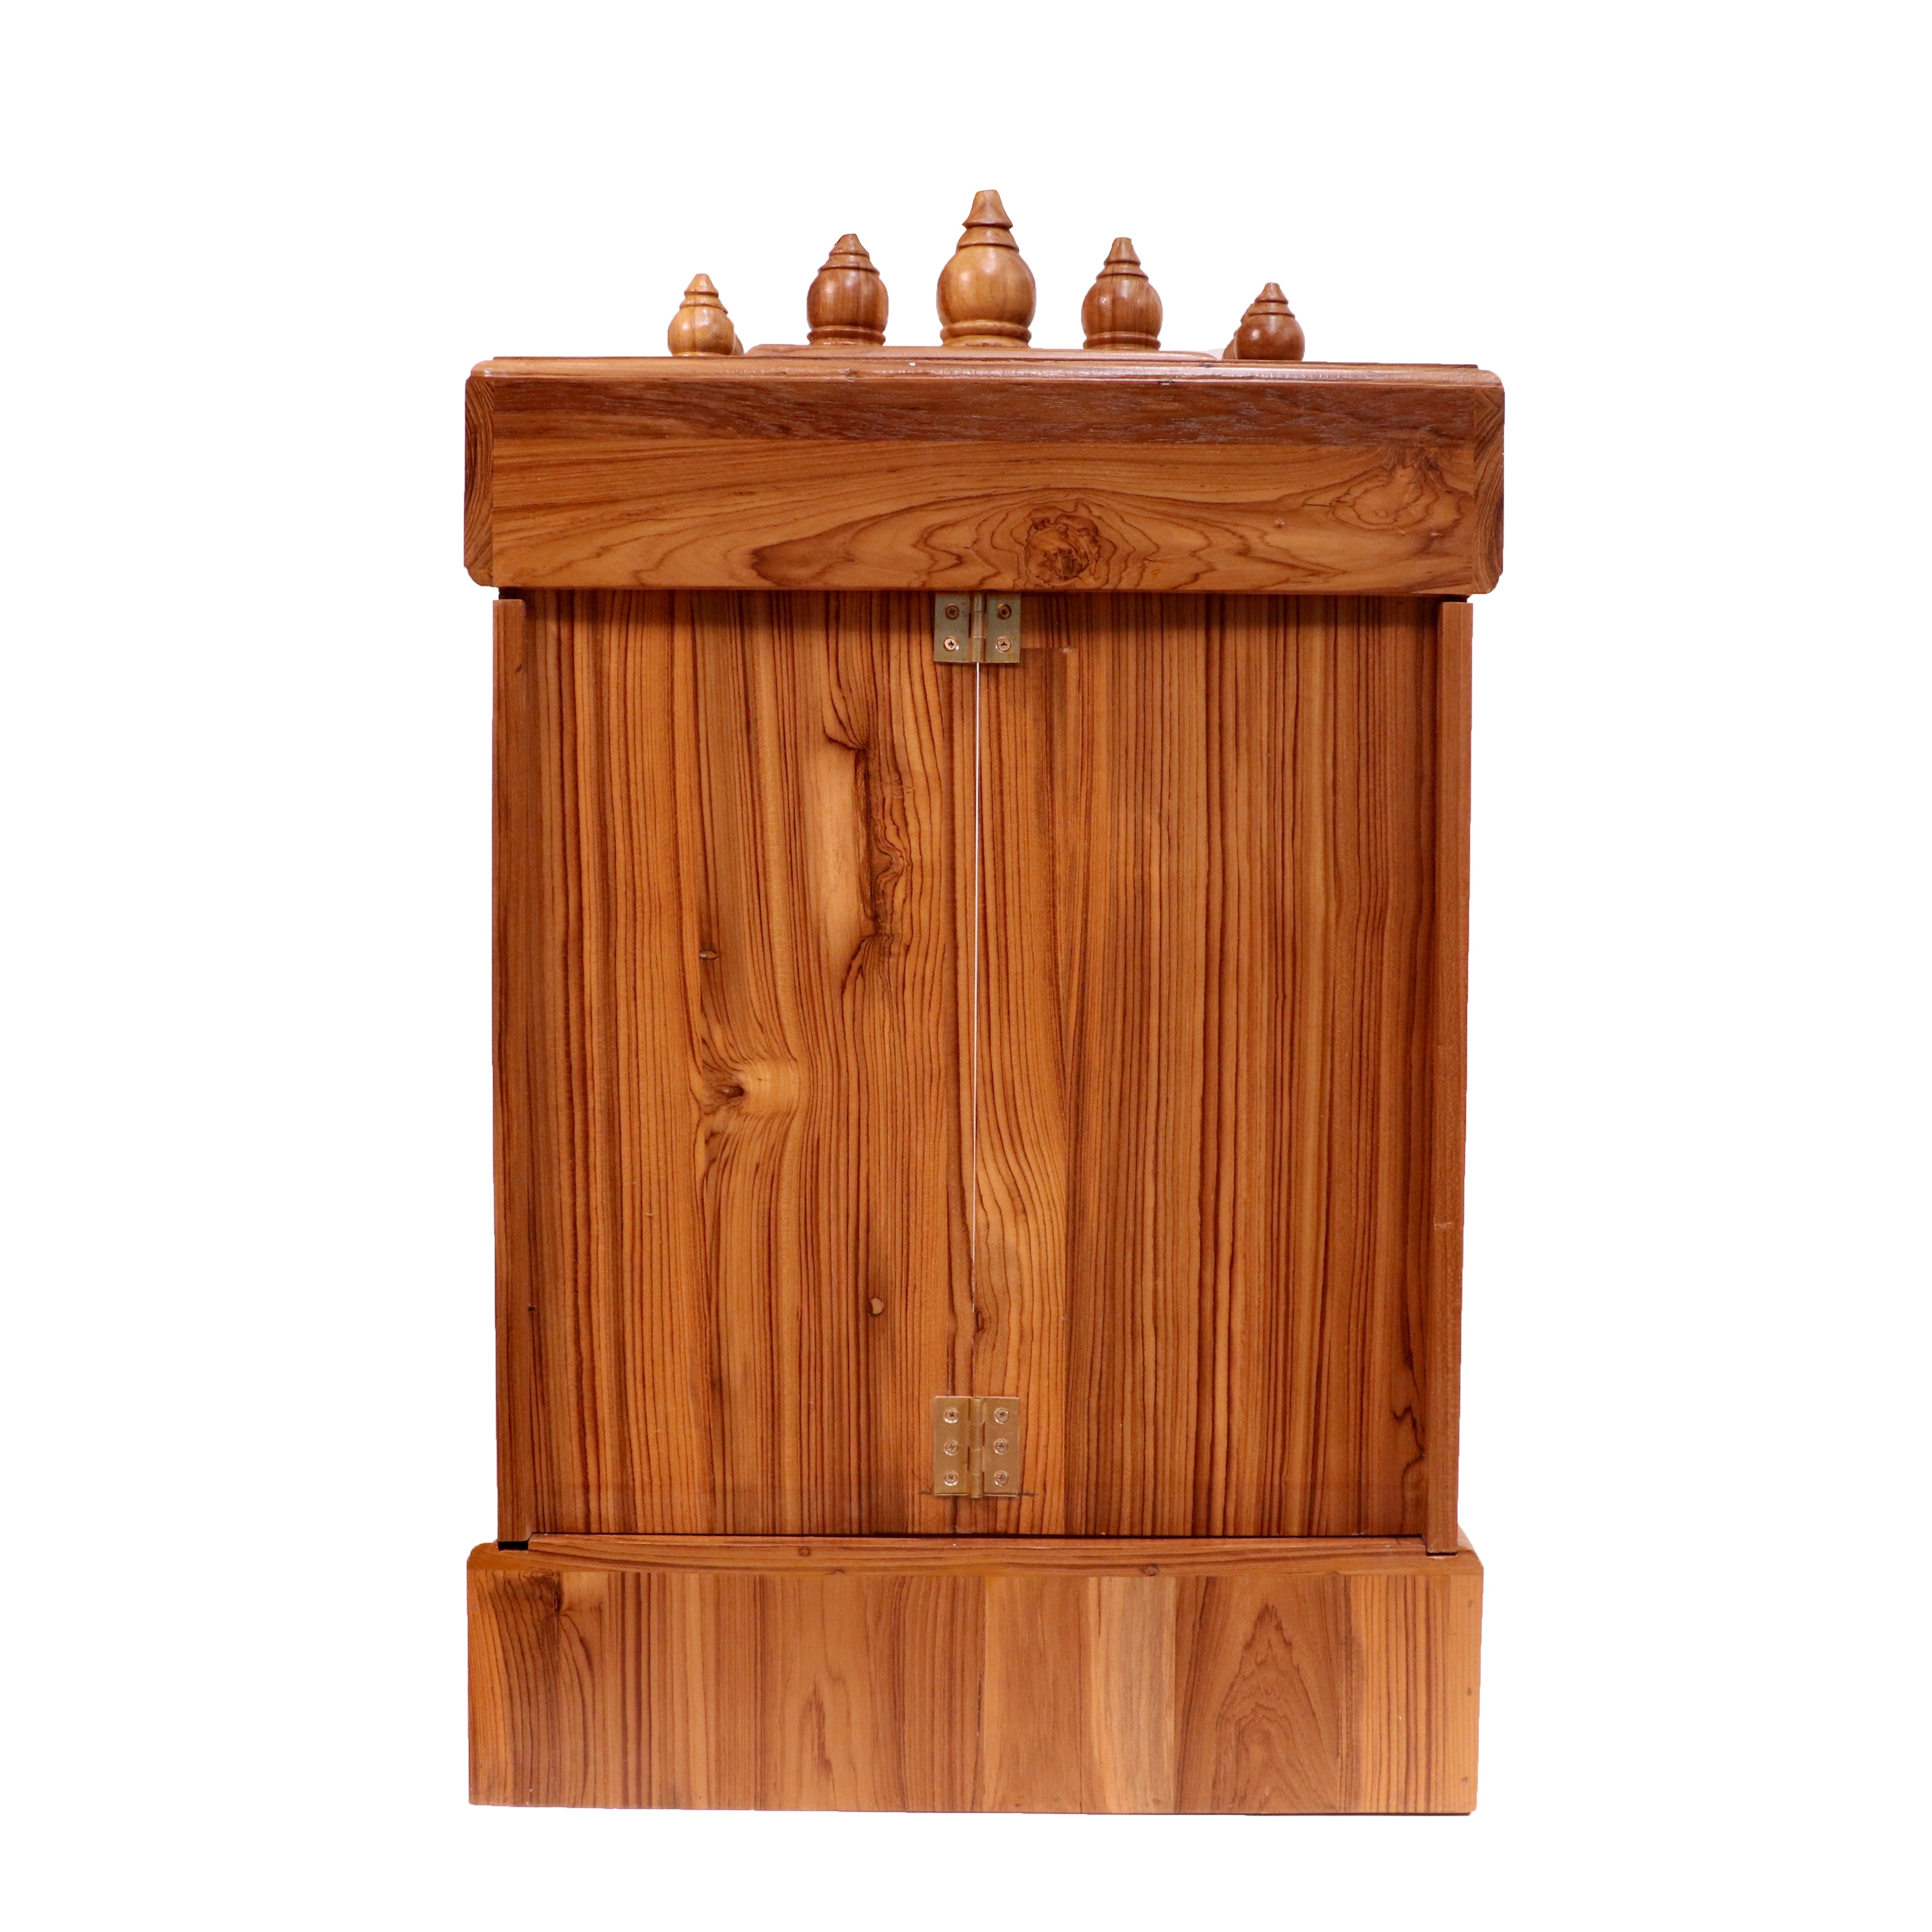 Vintage Tone Finish with Carved Jali Handmade Wooden Temple for Home Temple